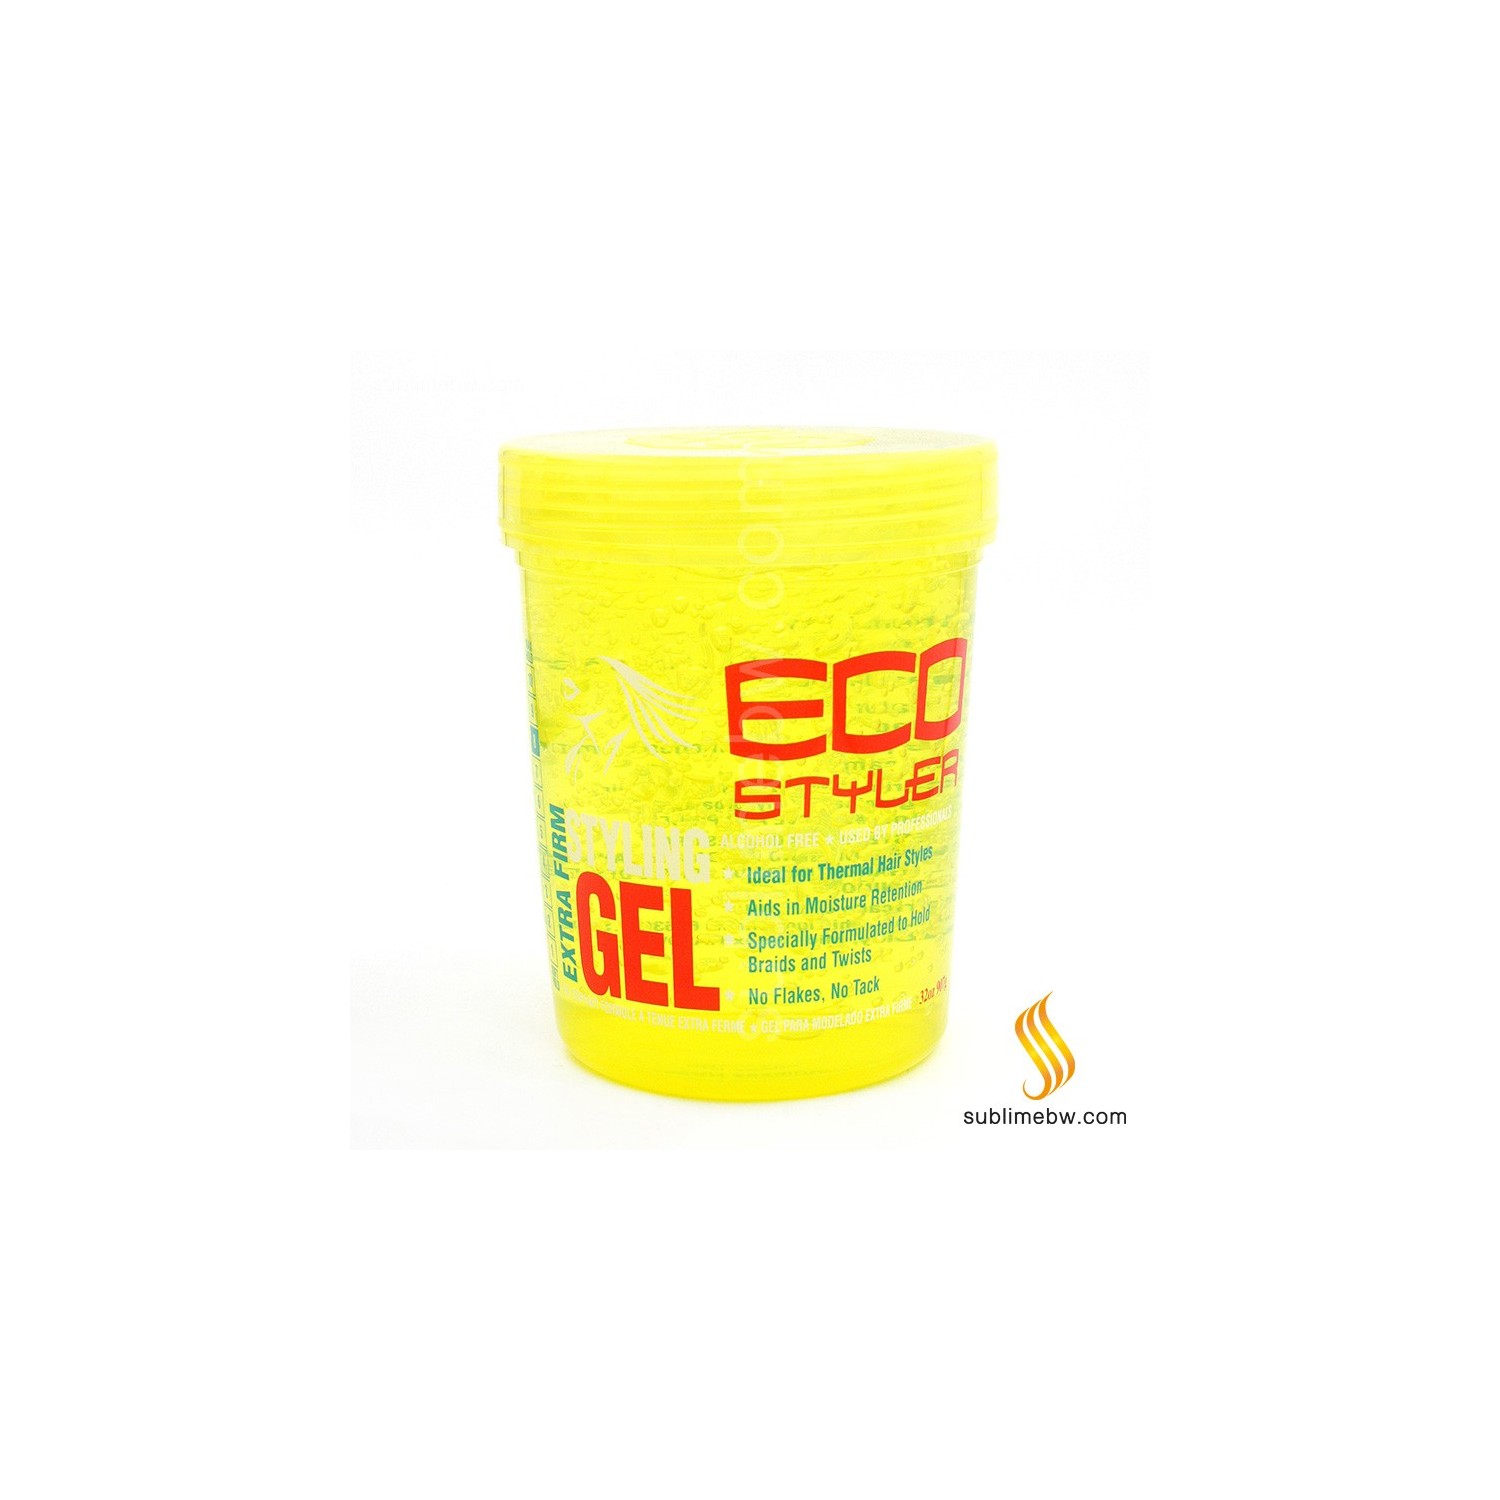 Eco Styler Styling Gel Couleur Yellow 907 Gr